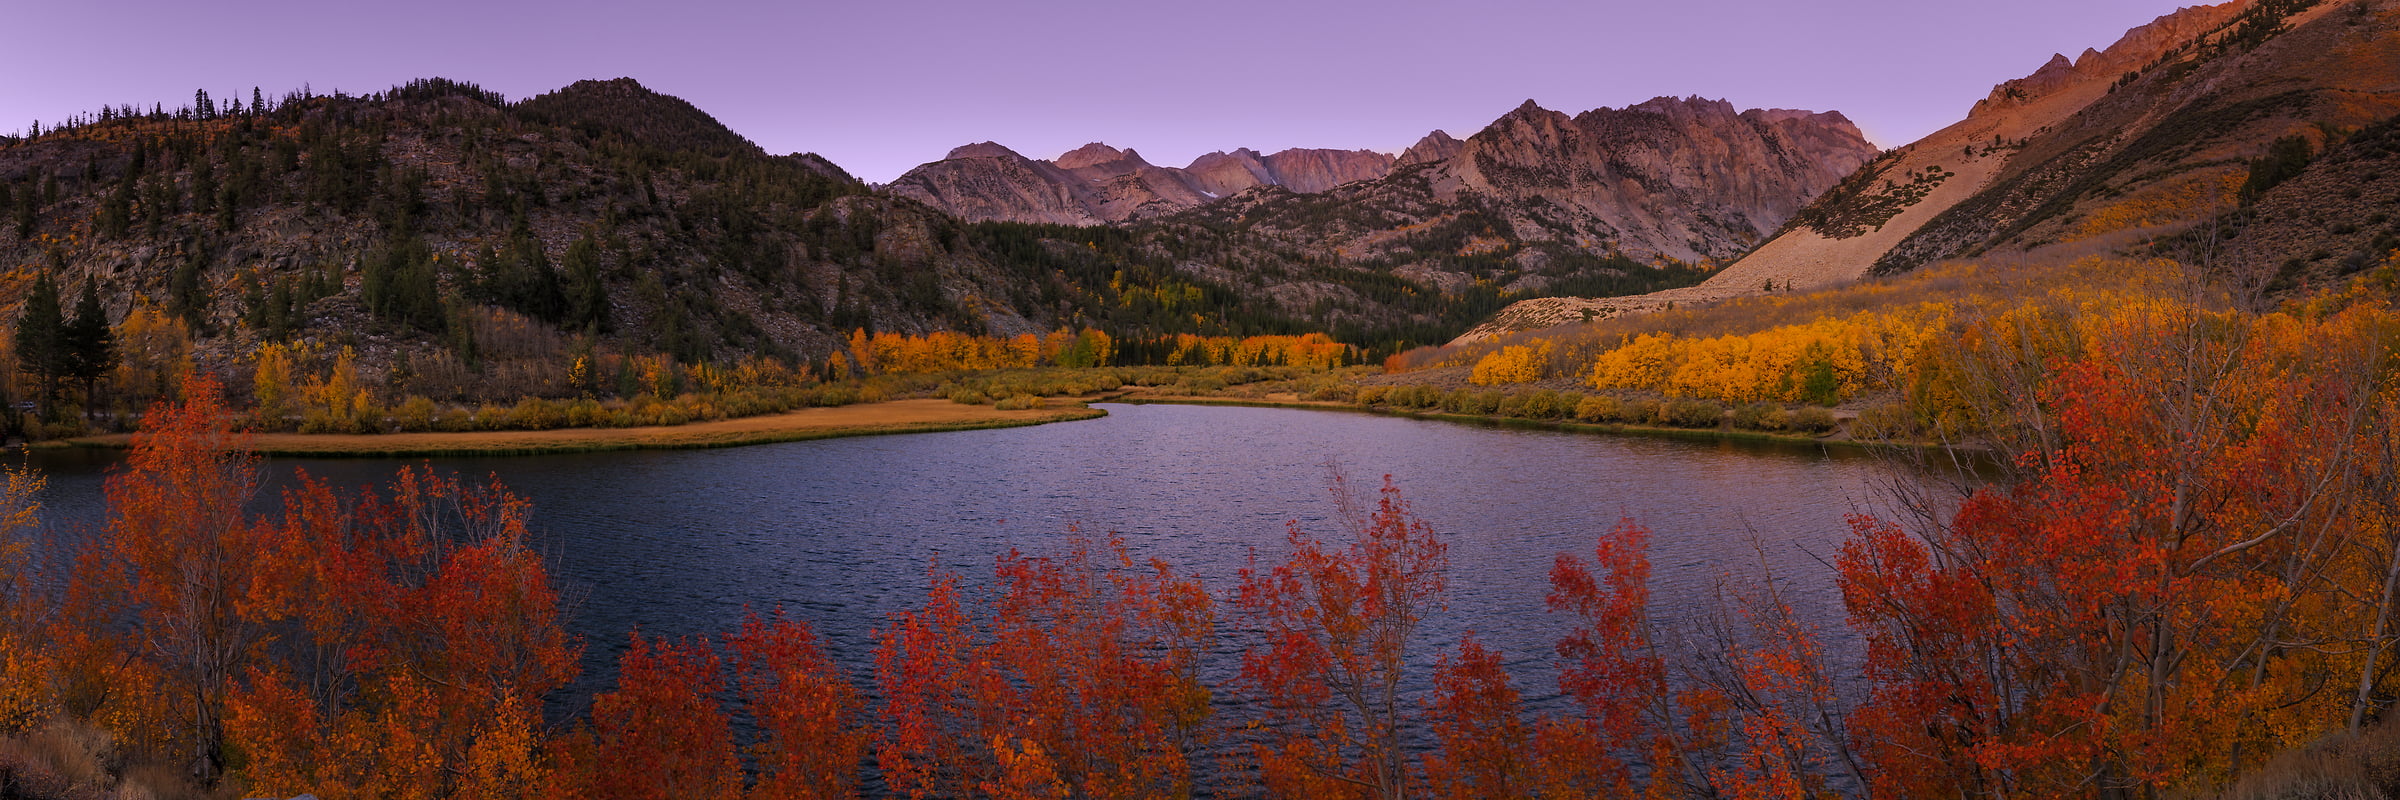 150 megapixels! A very high resolution, large-format VAST photo print of North Lake in the Sierra Nevada Mountains, California in Autumn; nature landscape photo created by Guido Brandt.